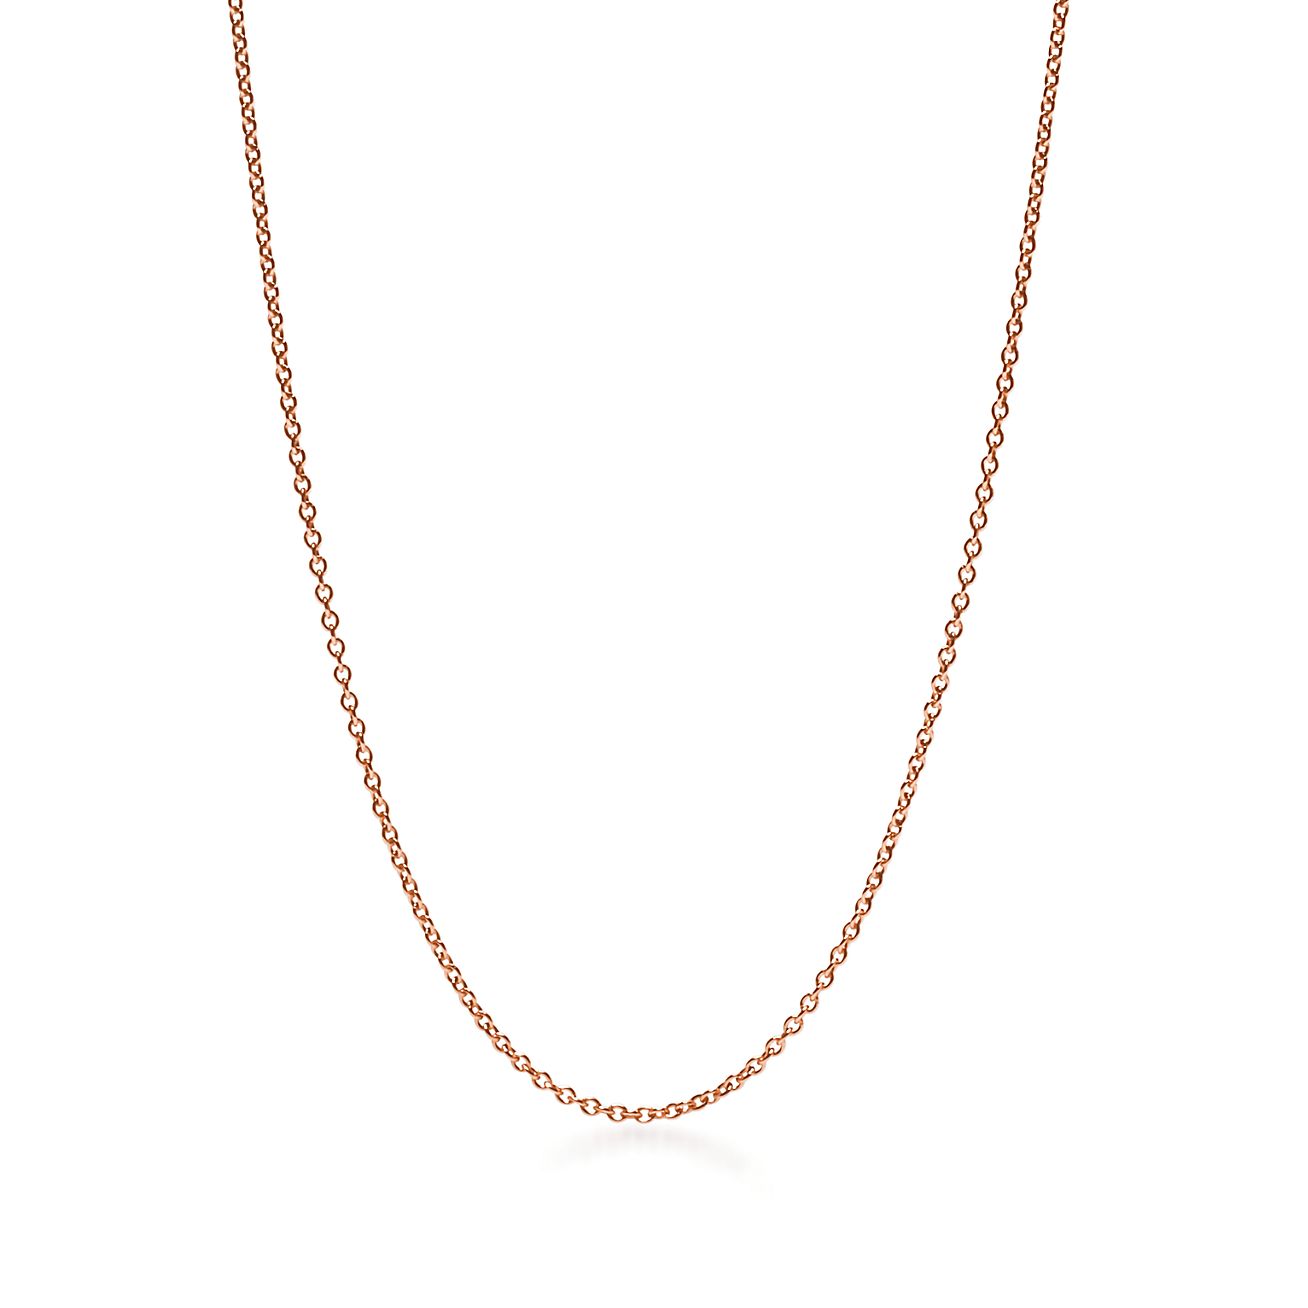 Rose Gold Necklace Chain | Tiffany & Co.